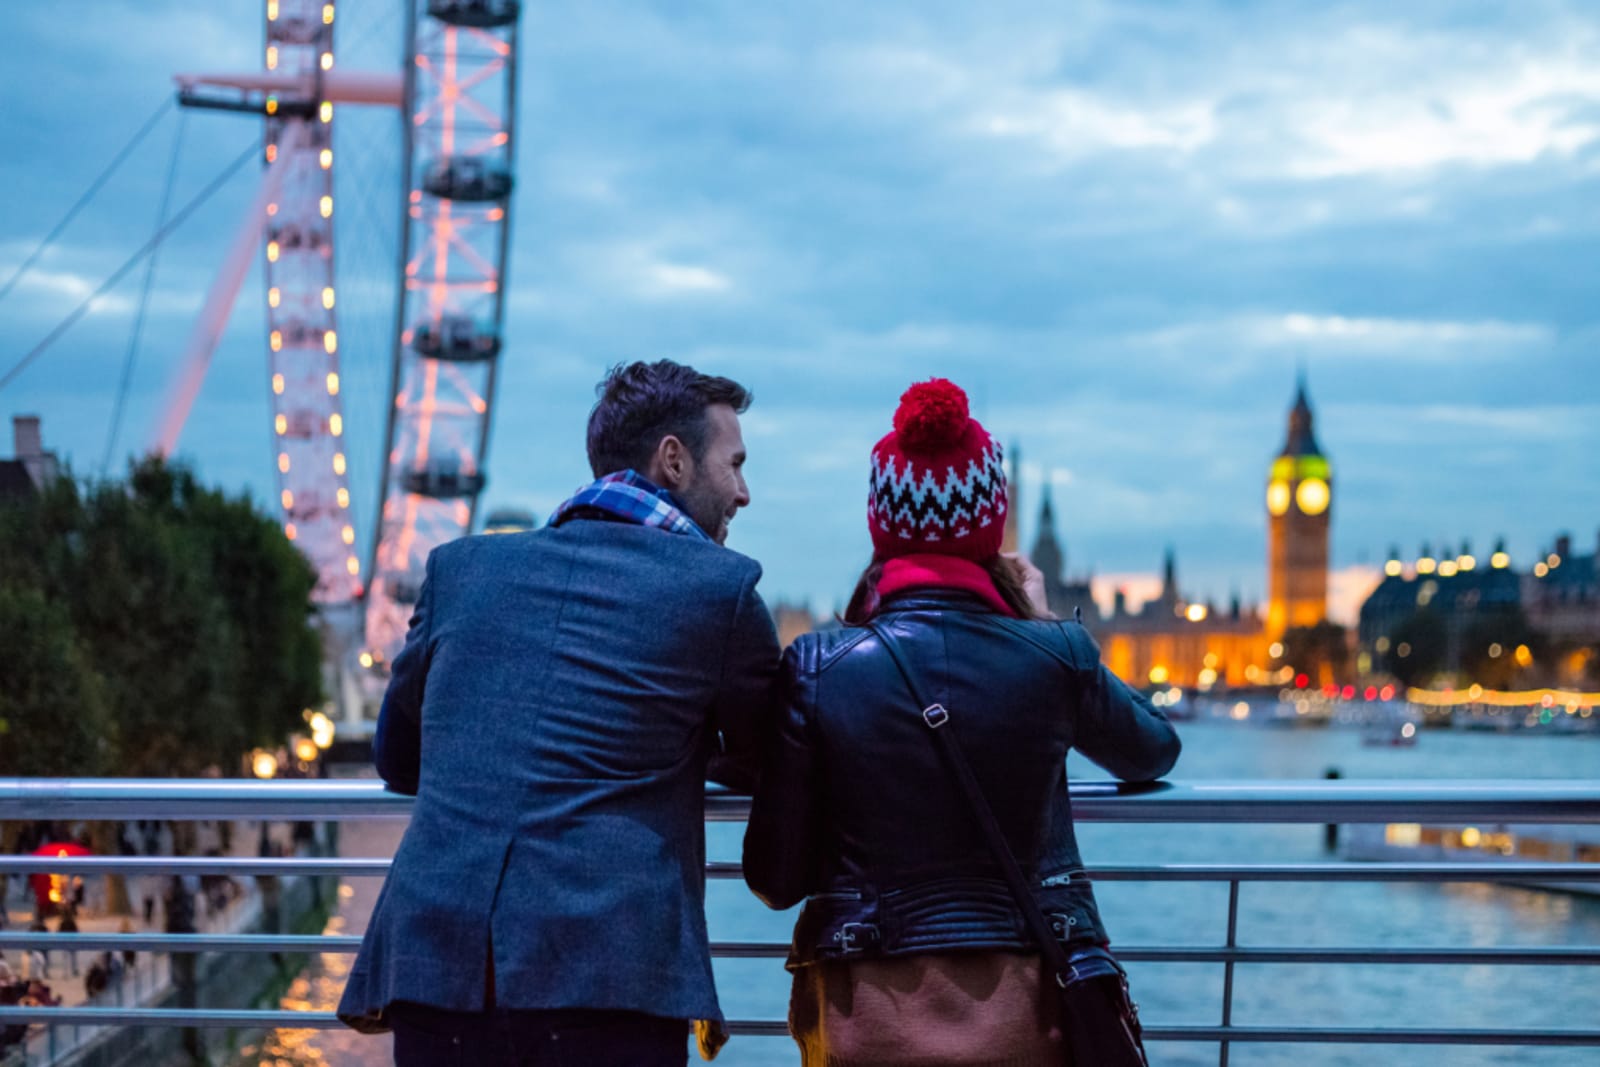 Couple in London with London Eye and Big Ben in the background